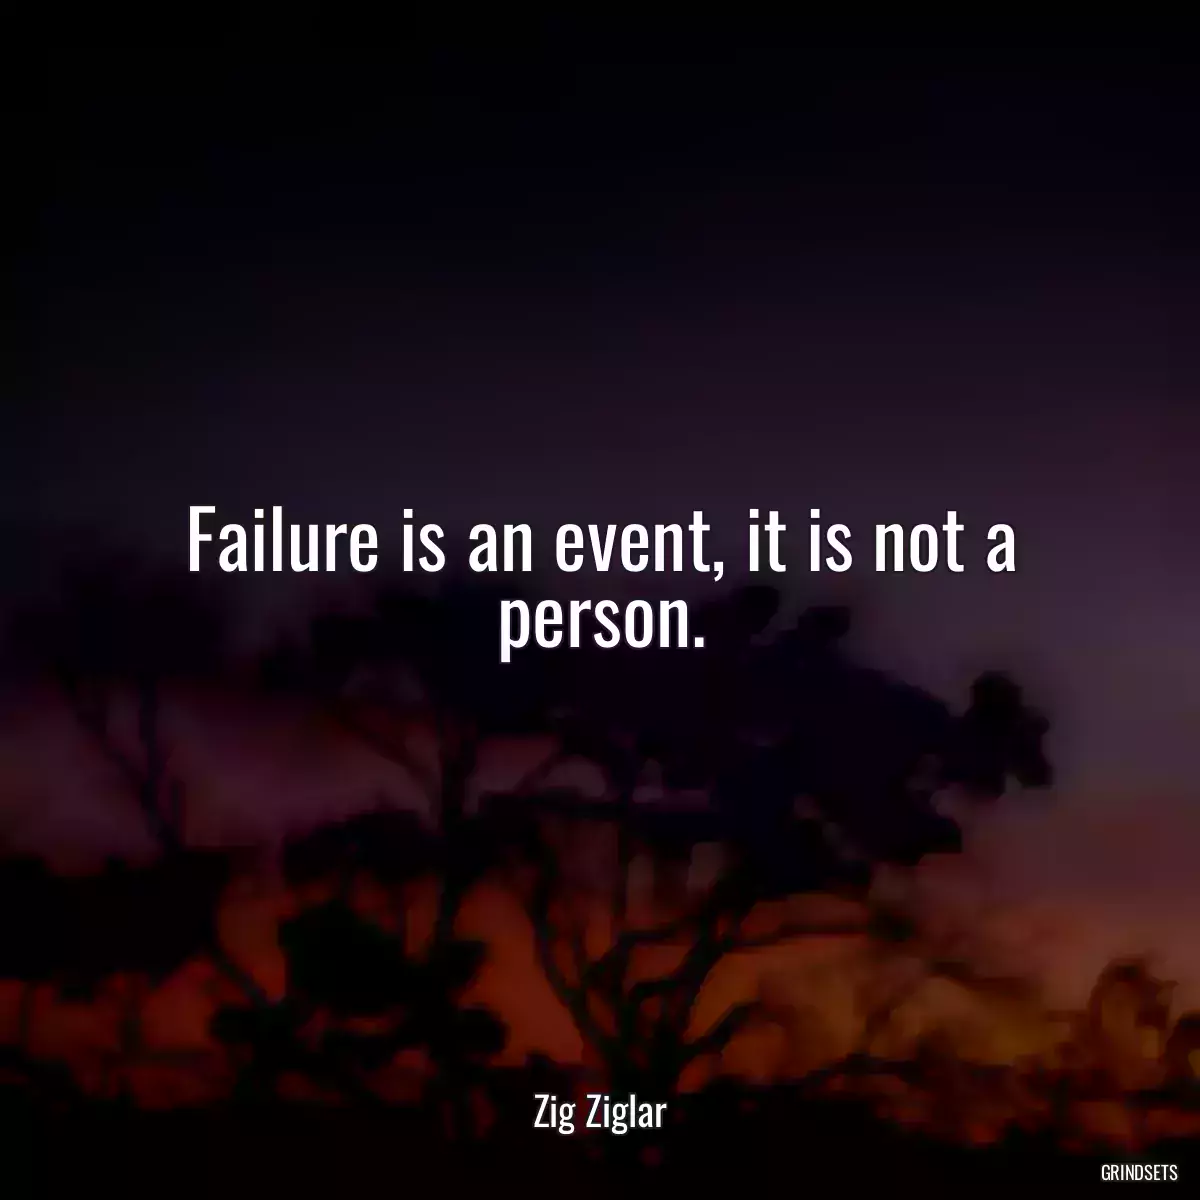 Failure is an event, it is not a person.